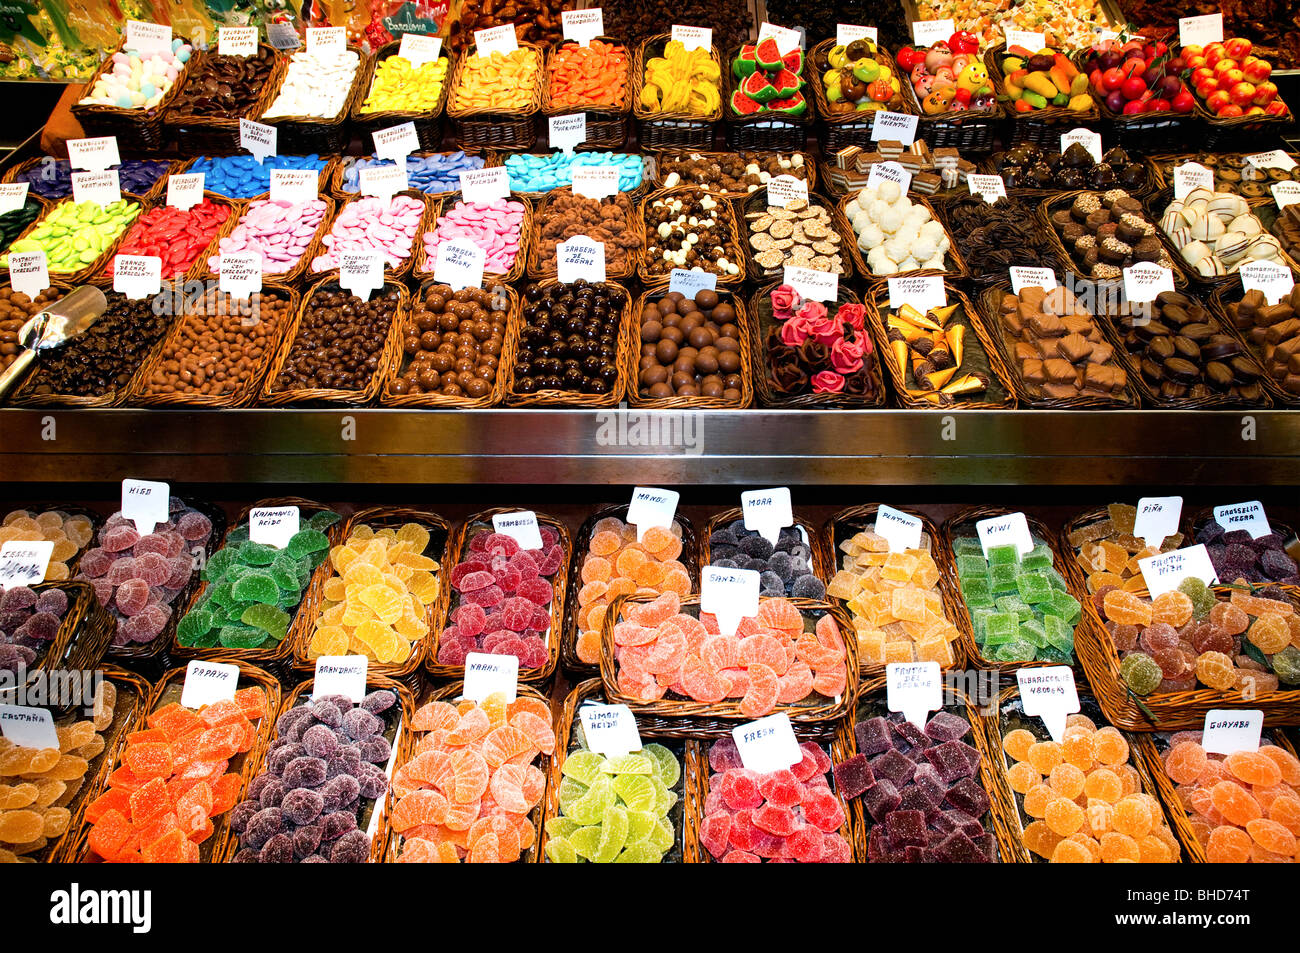 Sweets and candies for sale at La Boqueria, Barcelona Spain Stock Photo